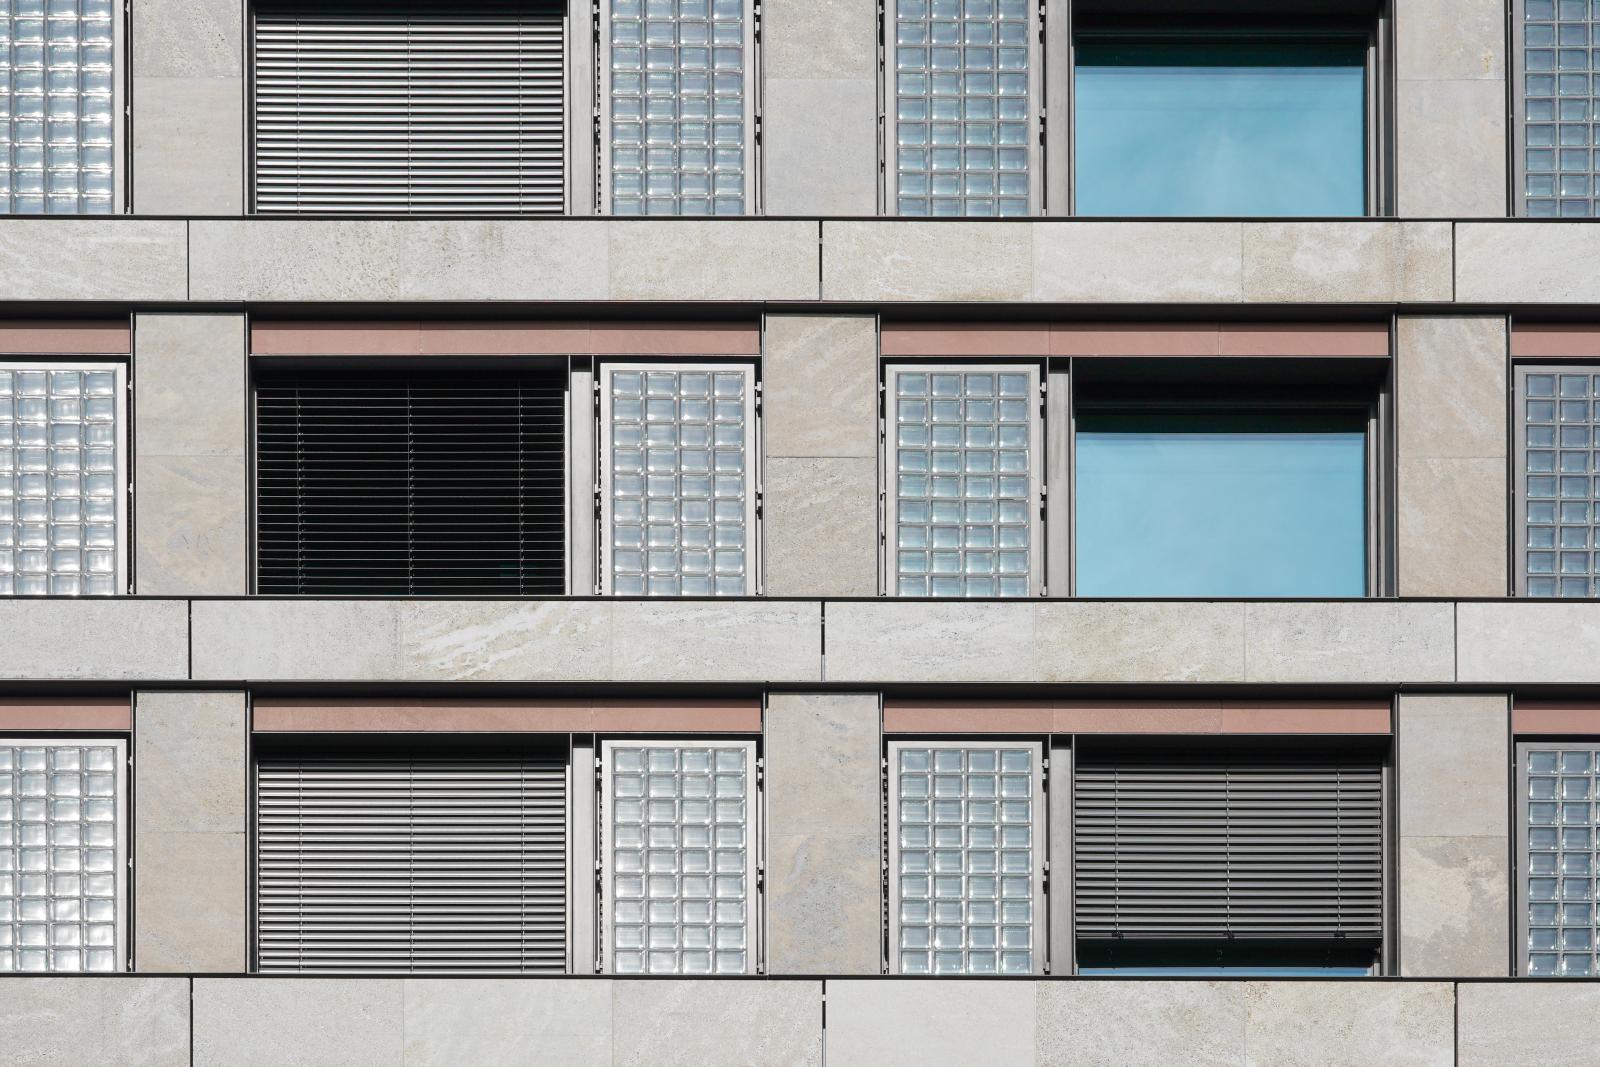 Image from New Photographs -  Zürich, Switzerland  # 4283 3/2024 Rhythmic Repetition:...